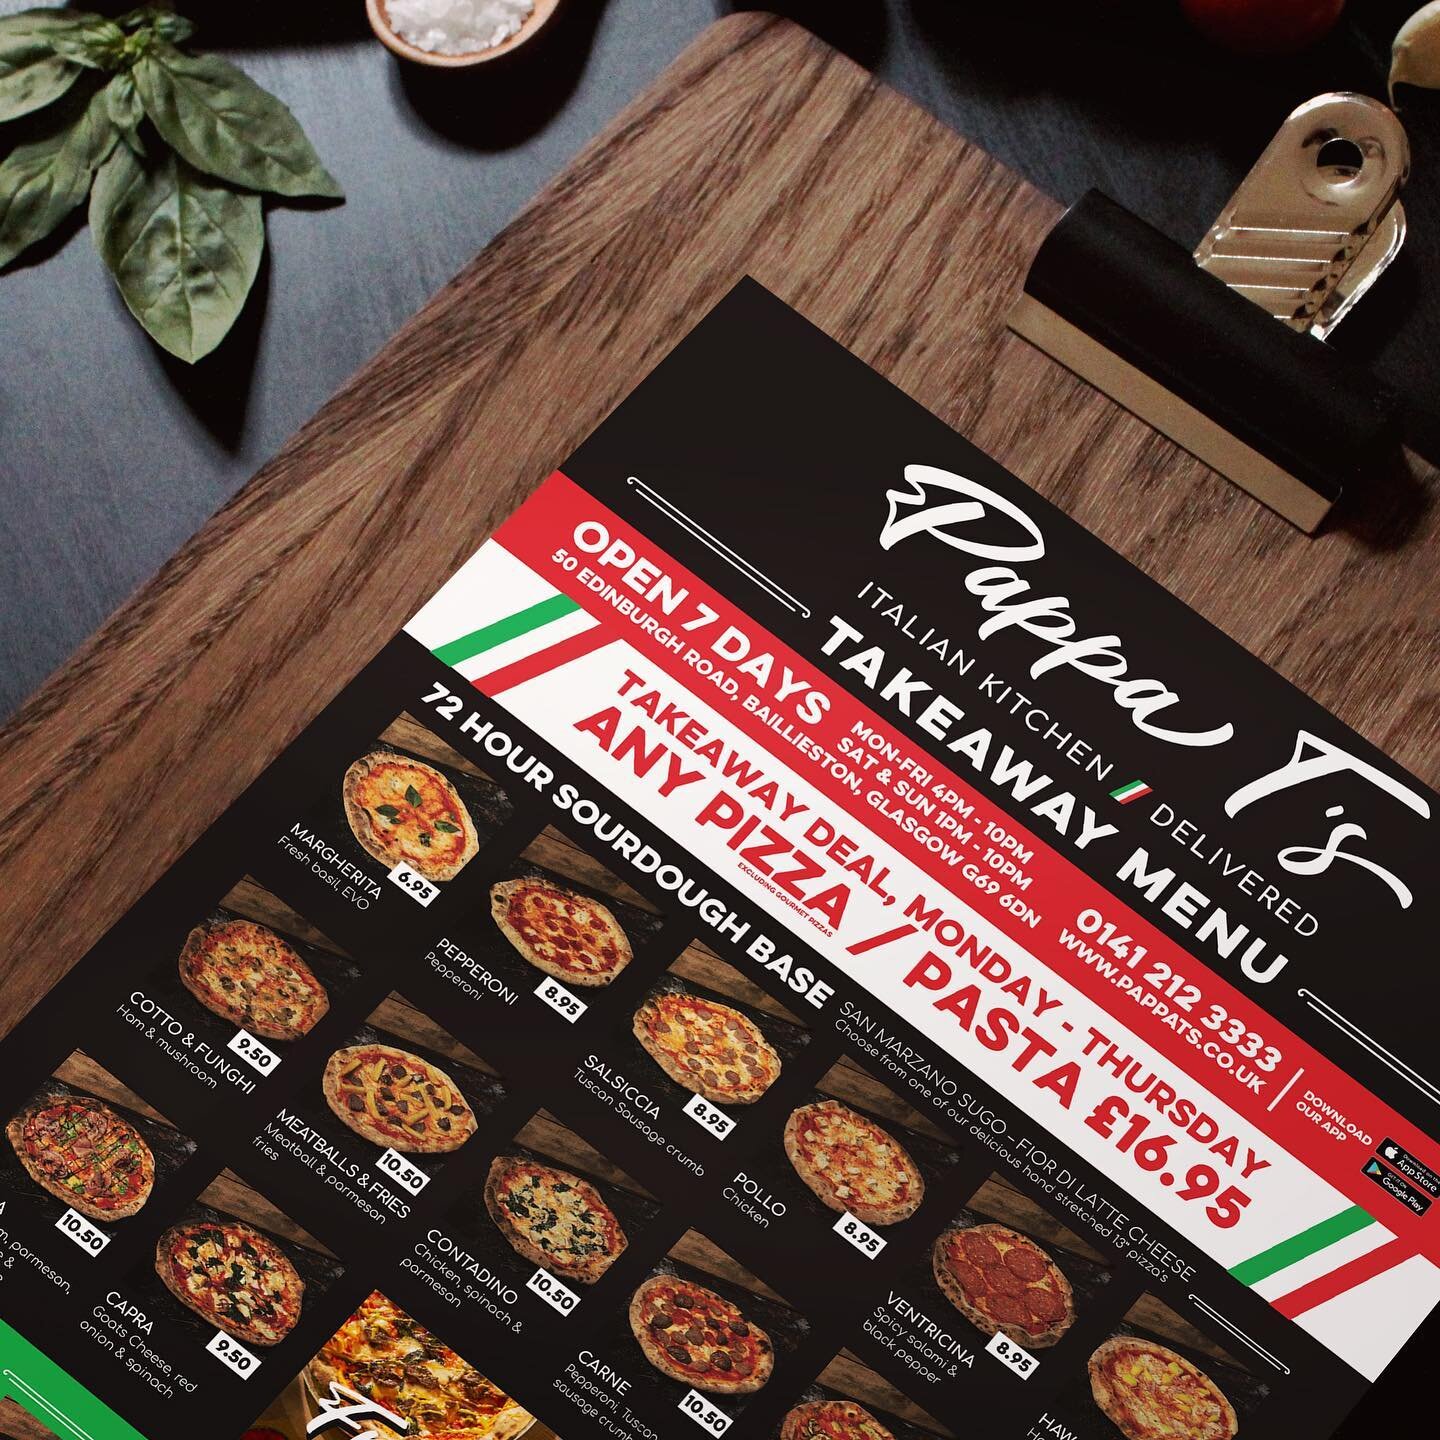 Menu design, print and distribution job for @pappatsbaillieston. Opened this week in Baillieston, Glasgow. If you like Italian food you&rsquo;ll love Pappa T&rsquo;s! #glasgowfoodies